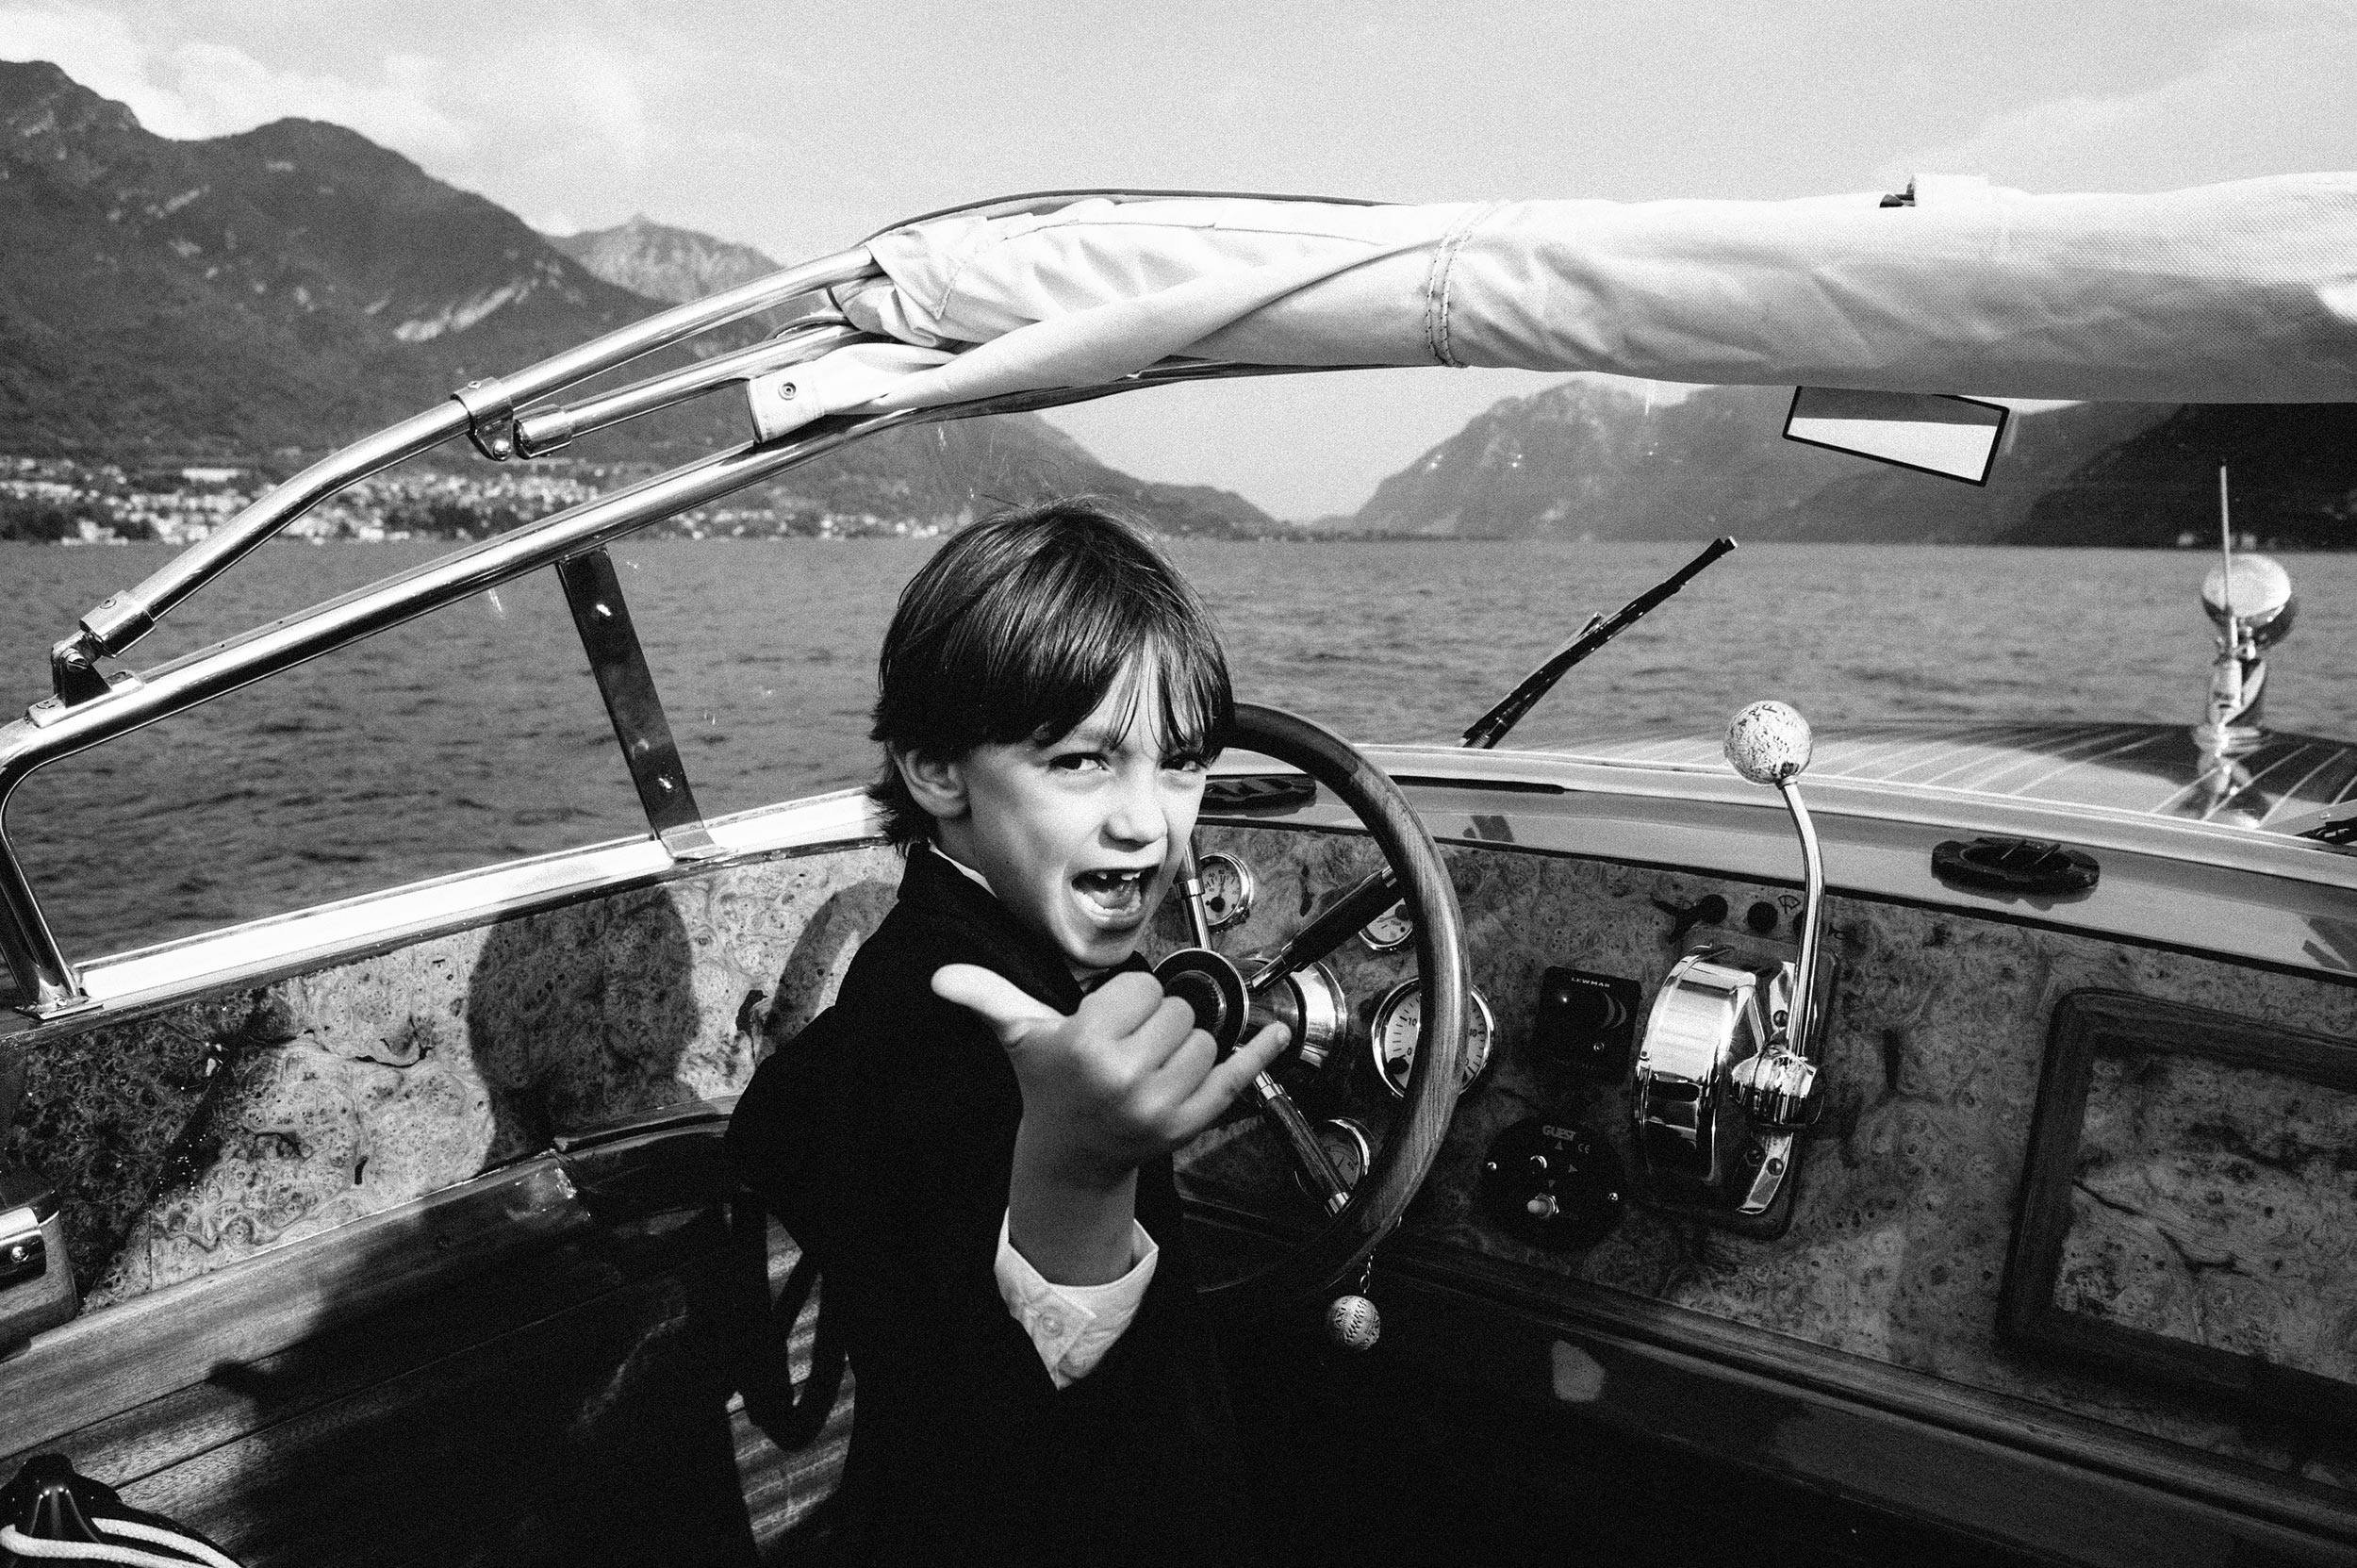 kid-driving-a-motorboat-on-lake-como-black-and-white-wedding-photography.jpg